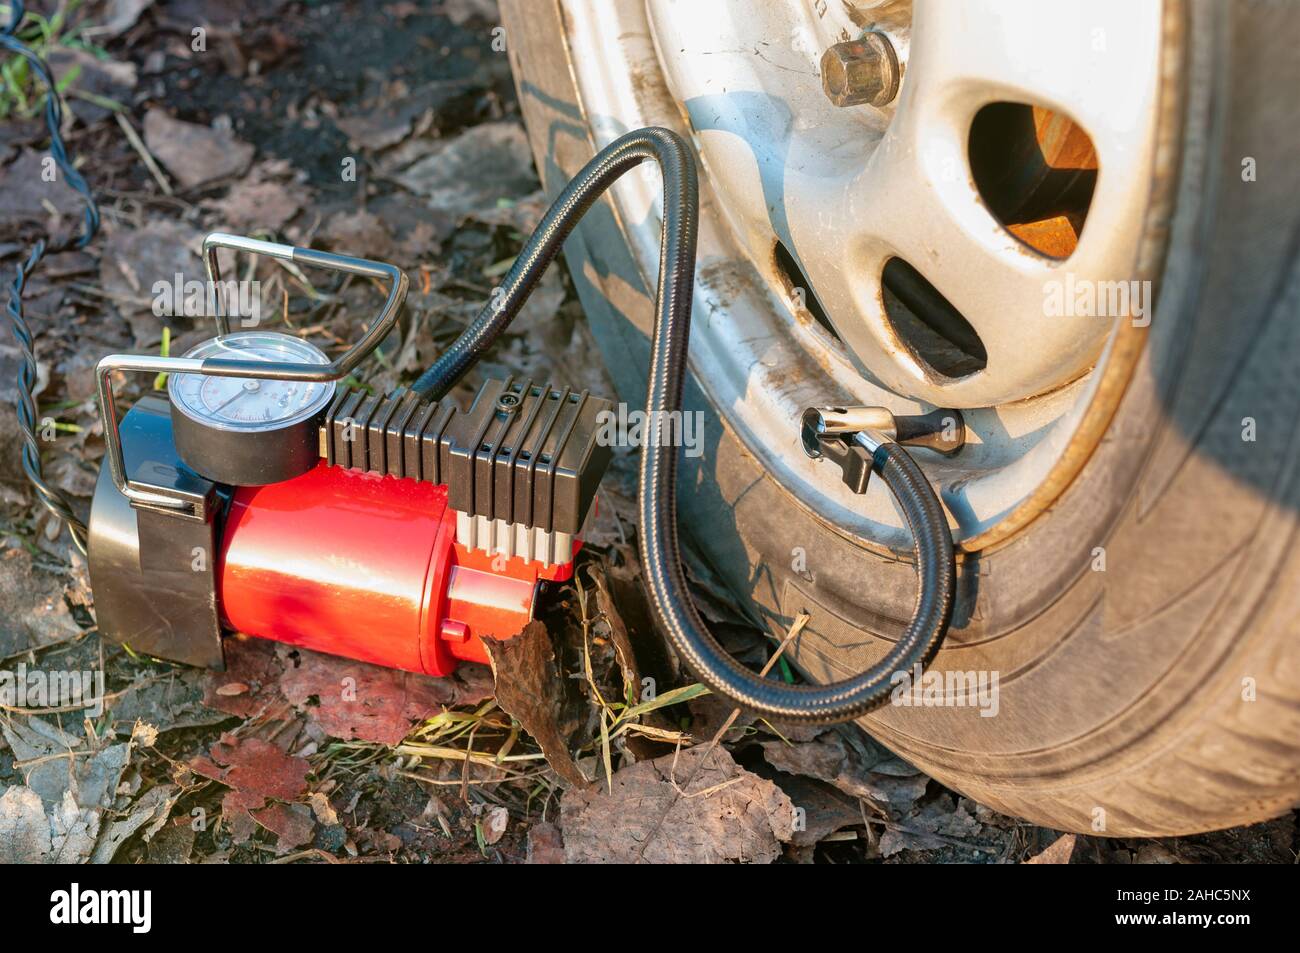 Car tire inflate with compressor Stock Photo